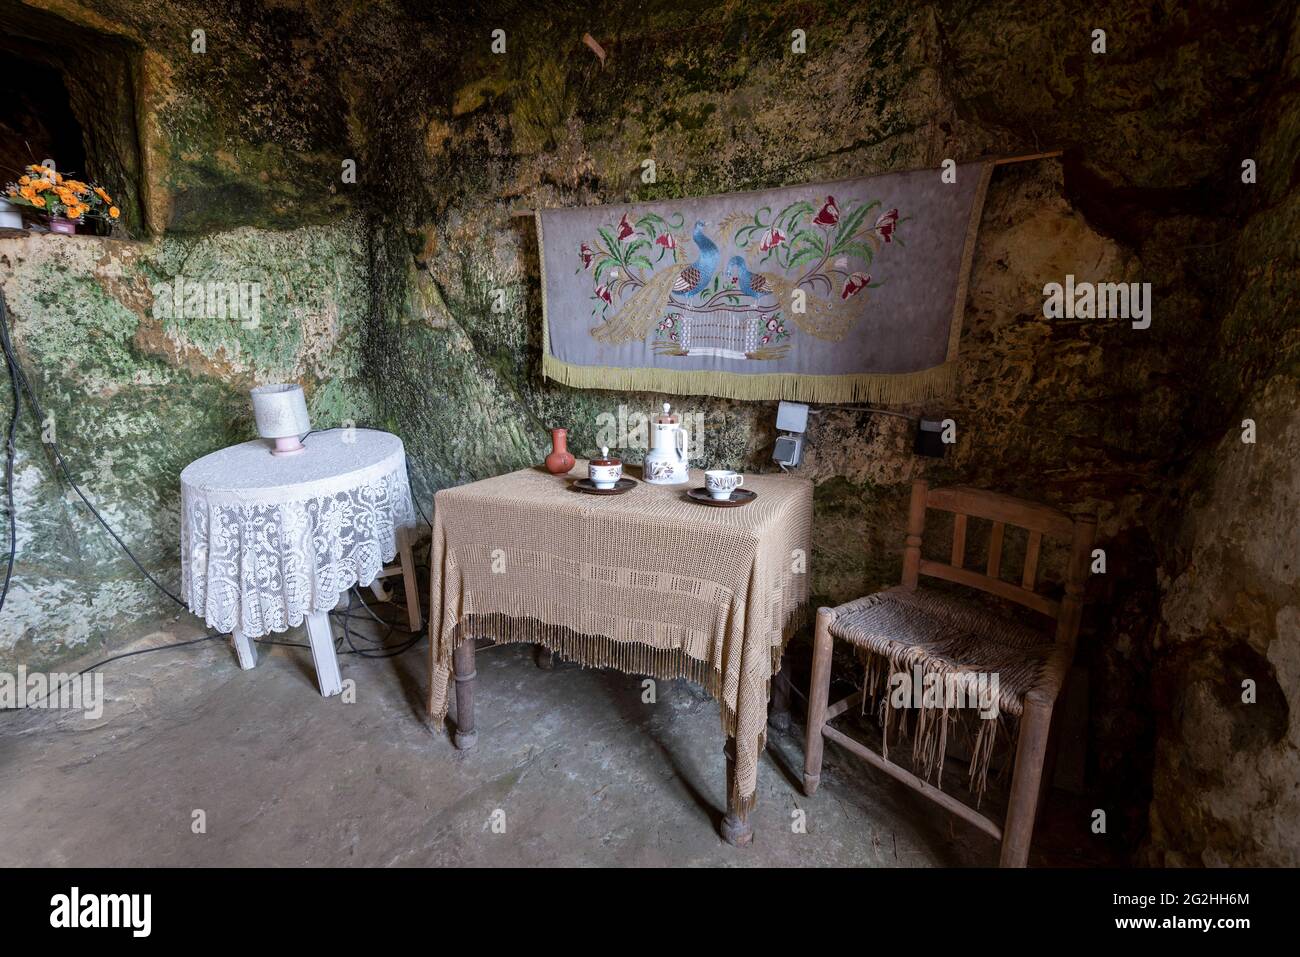 Germany, Saxony-Anhalt, Langenstein, laid table in one of the cave dwellings of Langenstein, carved in sandstone by migrant workers in the 19th century, now accessible to visitors, Harz. Stock Photo